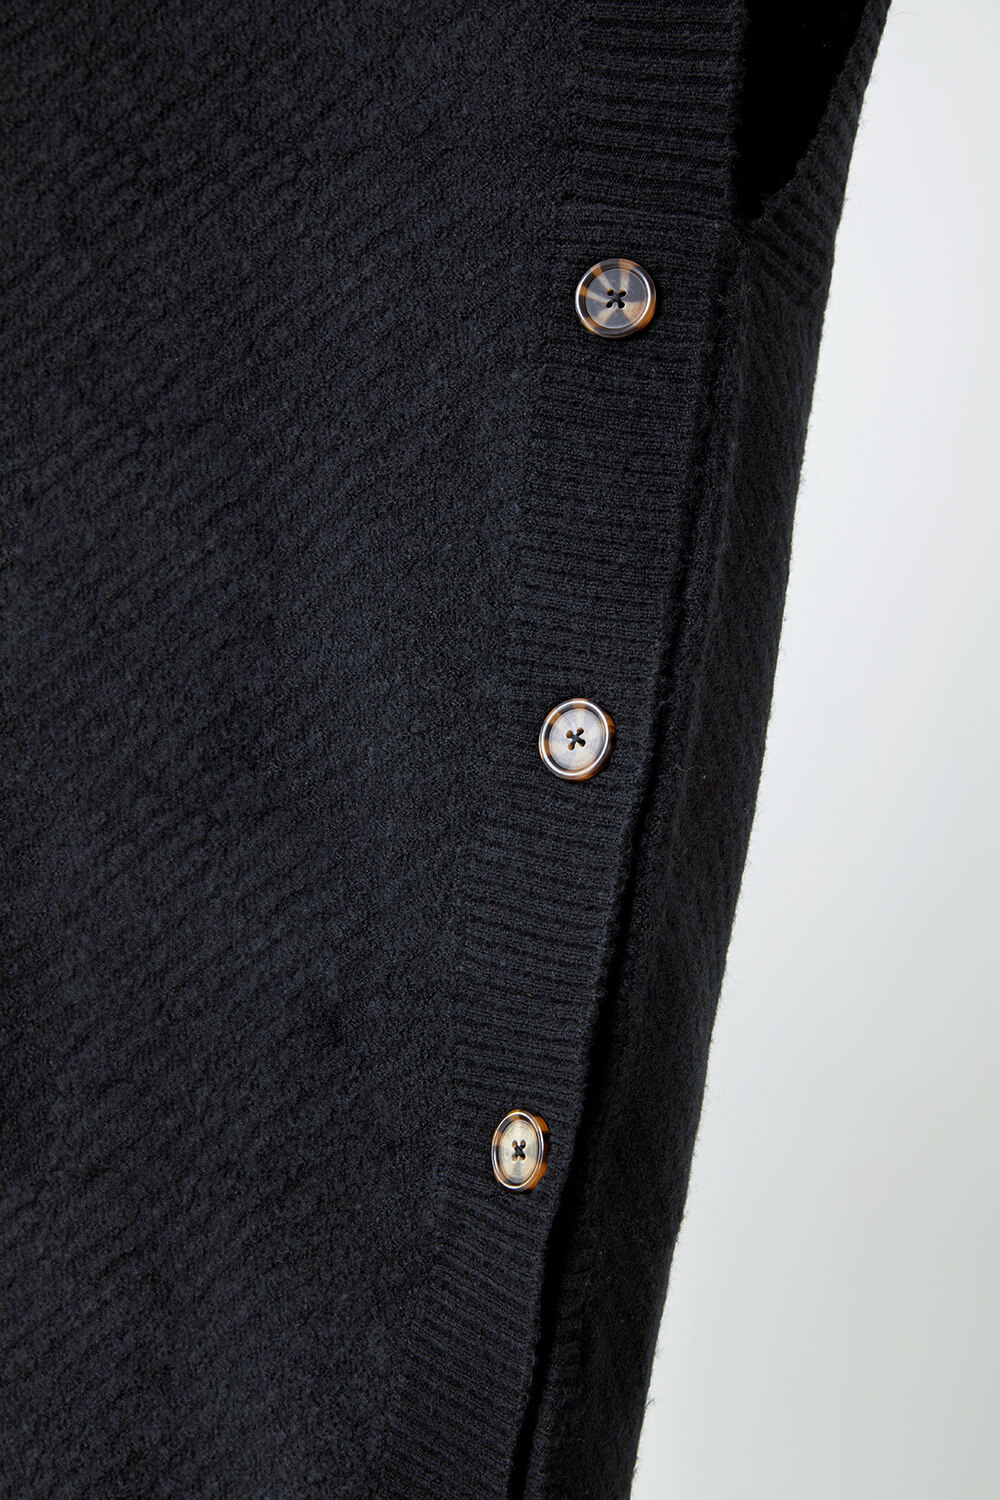 Black Curve Button Detail Stretch Poncho, Image 5 of 5